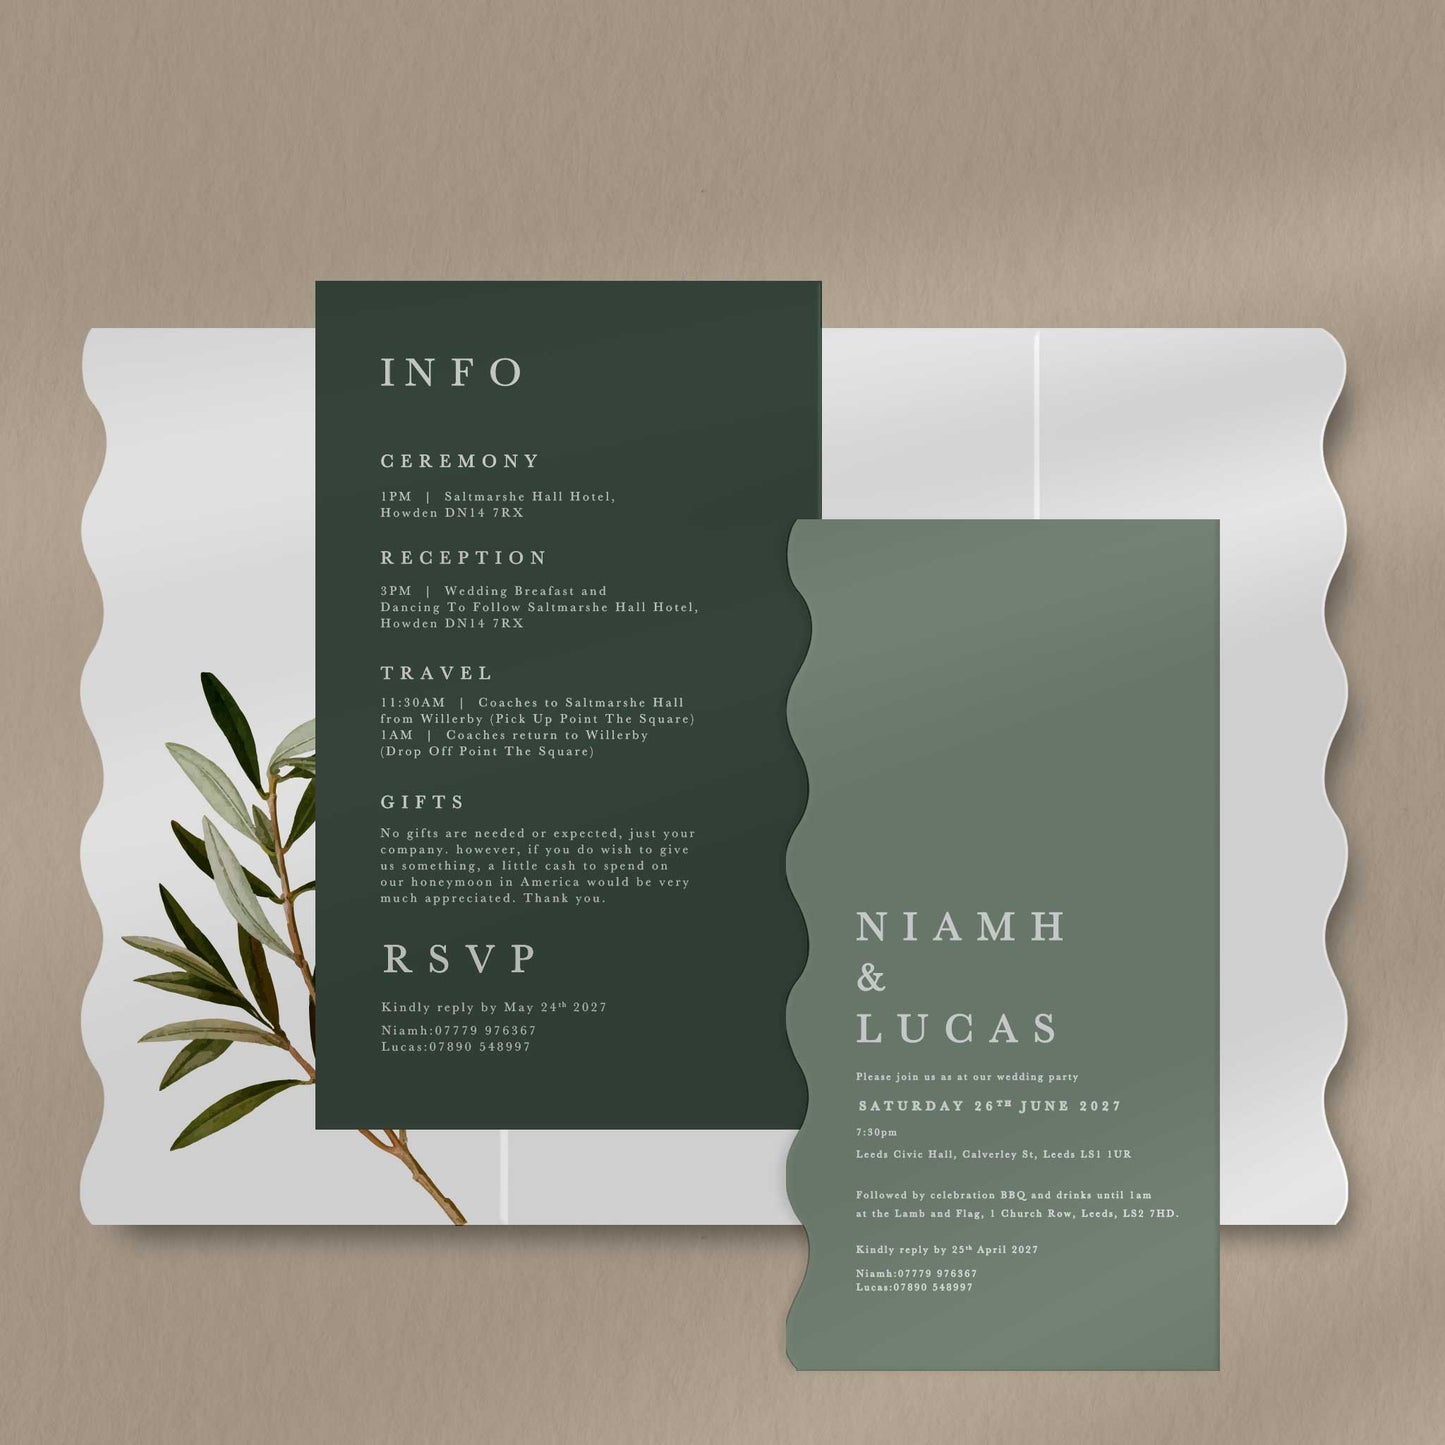 Scallop Envelope Sample  Ivy and Gold Wedding Stationery Niamh  